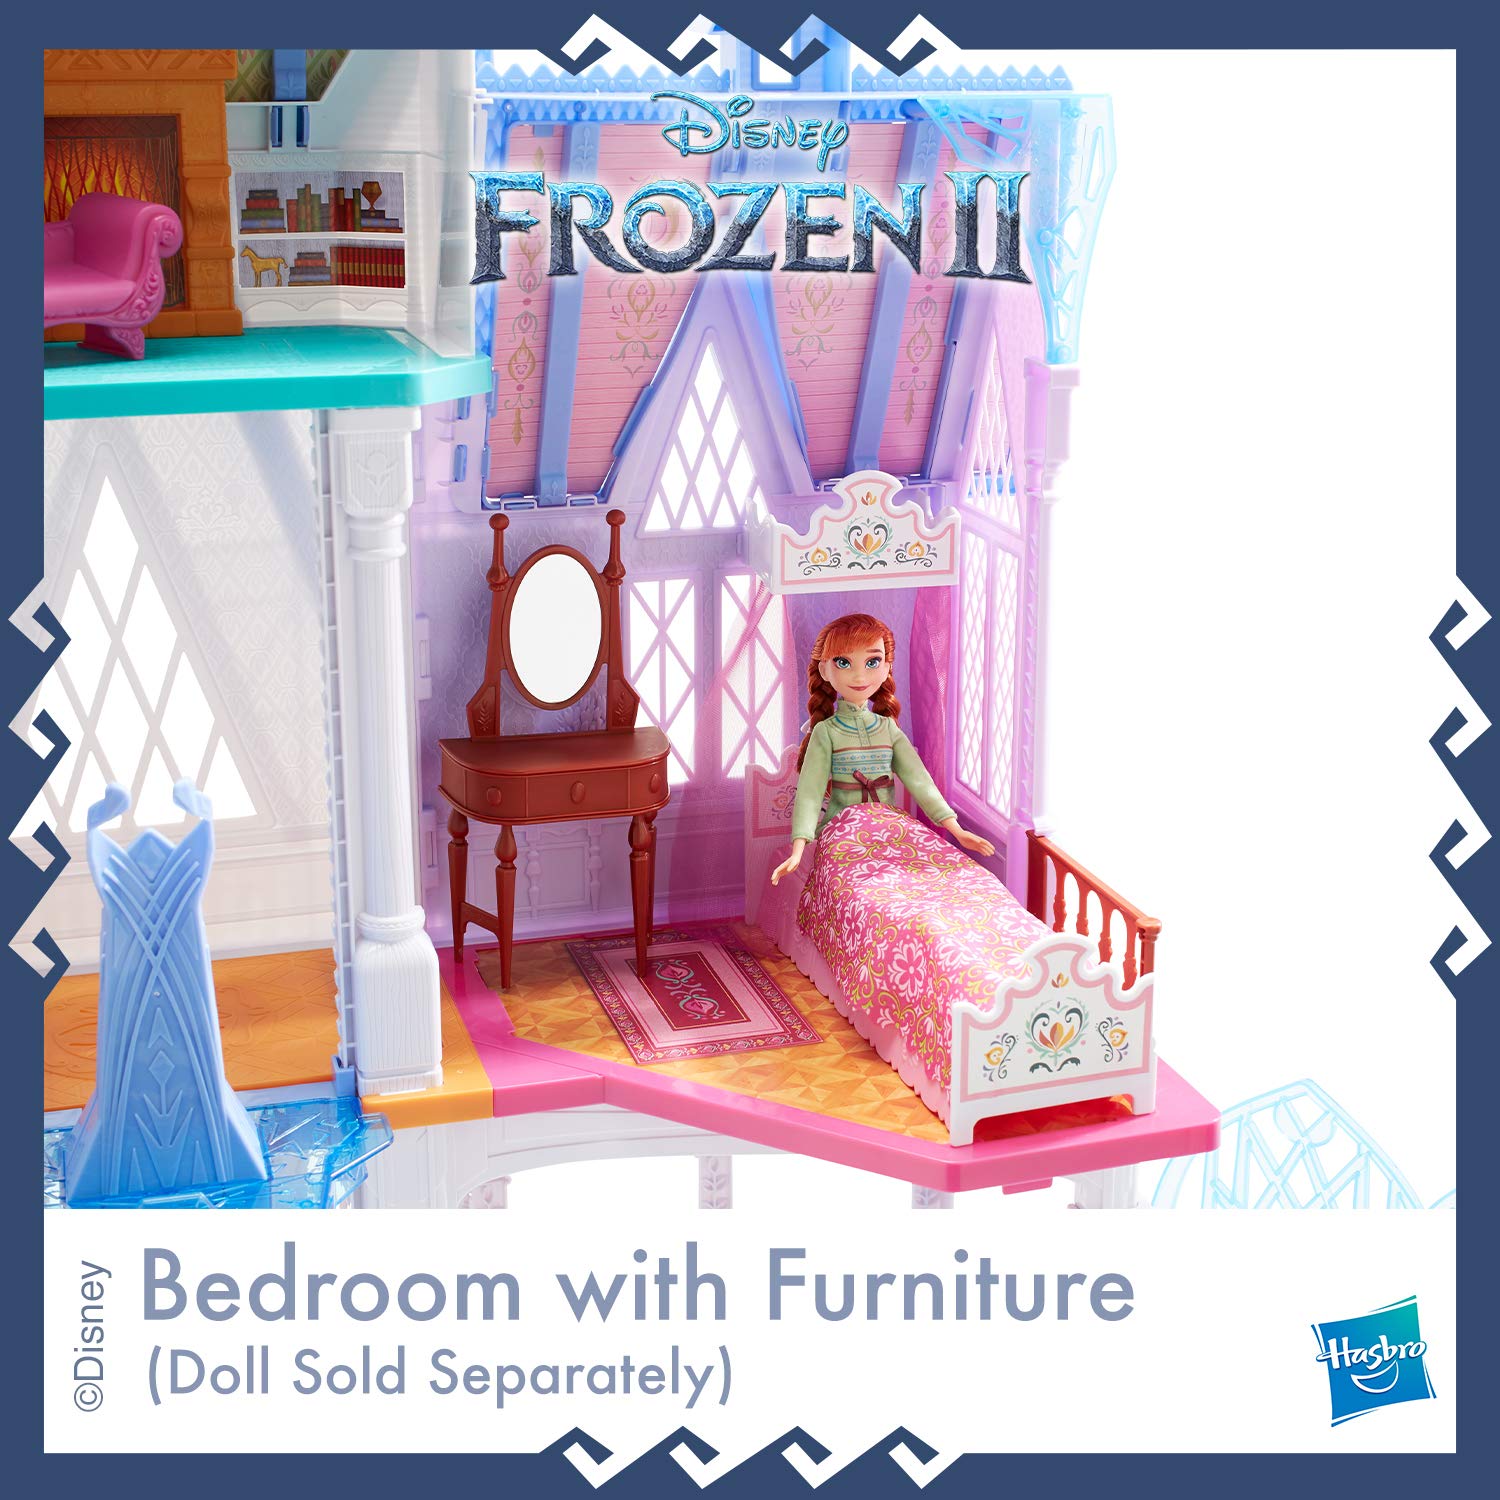 Disney Frozen Ultimate Arendelle Castle Playset Inspired by The Frozen 2 Movie, 5'. Tall with Lights, Moving Balcony, & 7 Rooms with Accessories